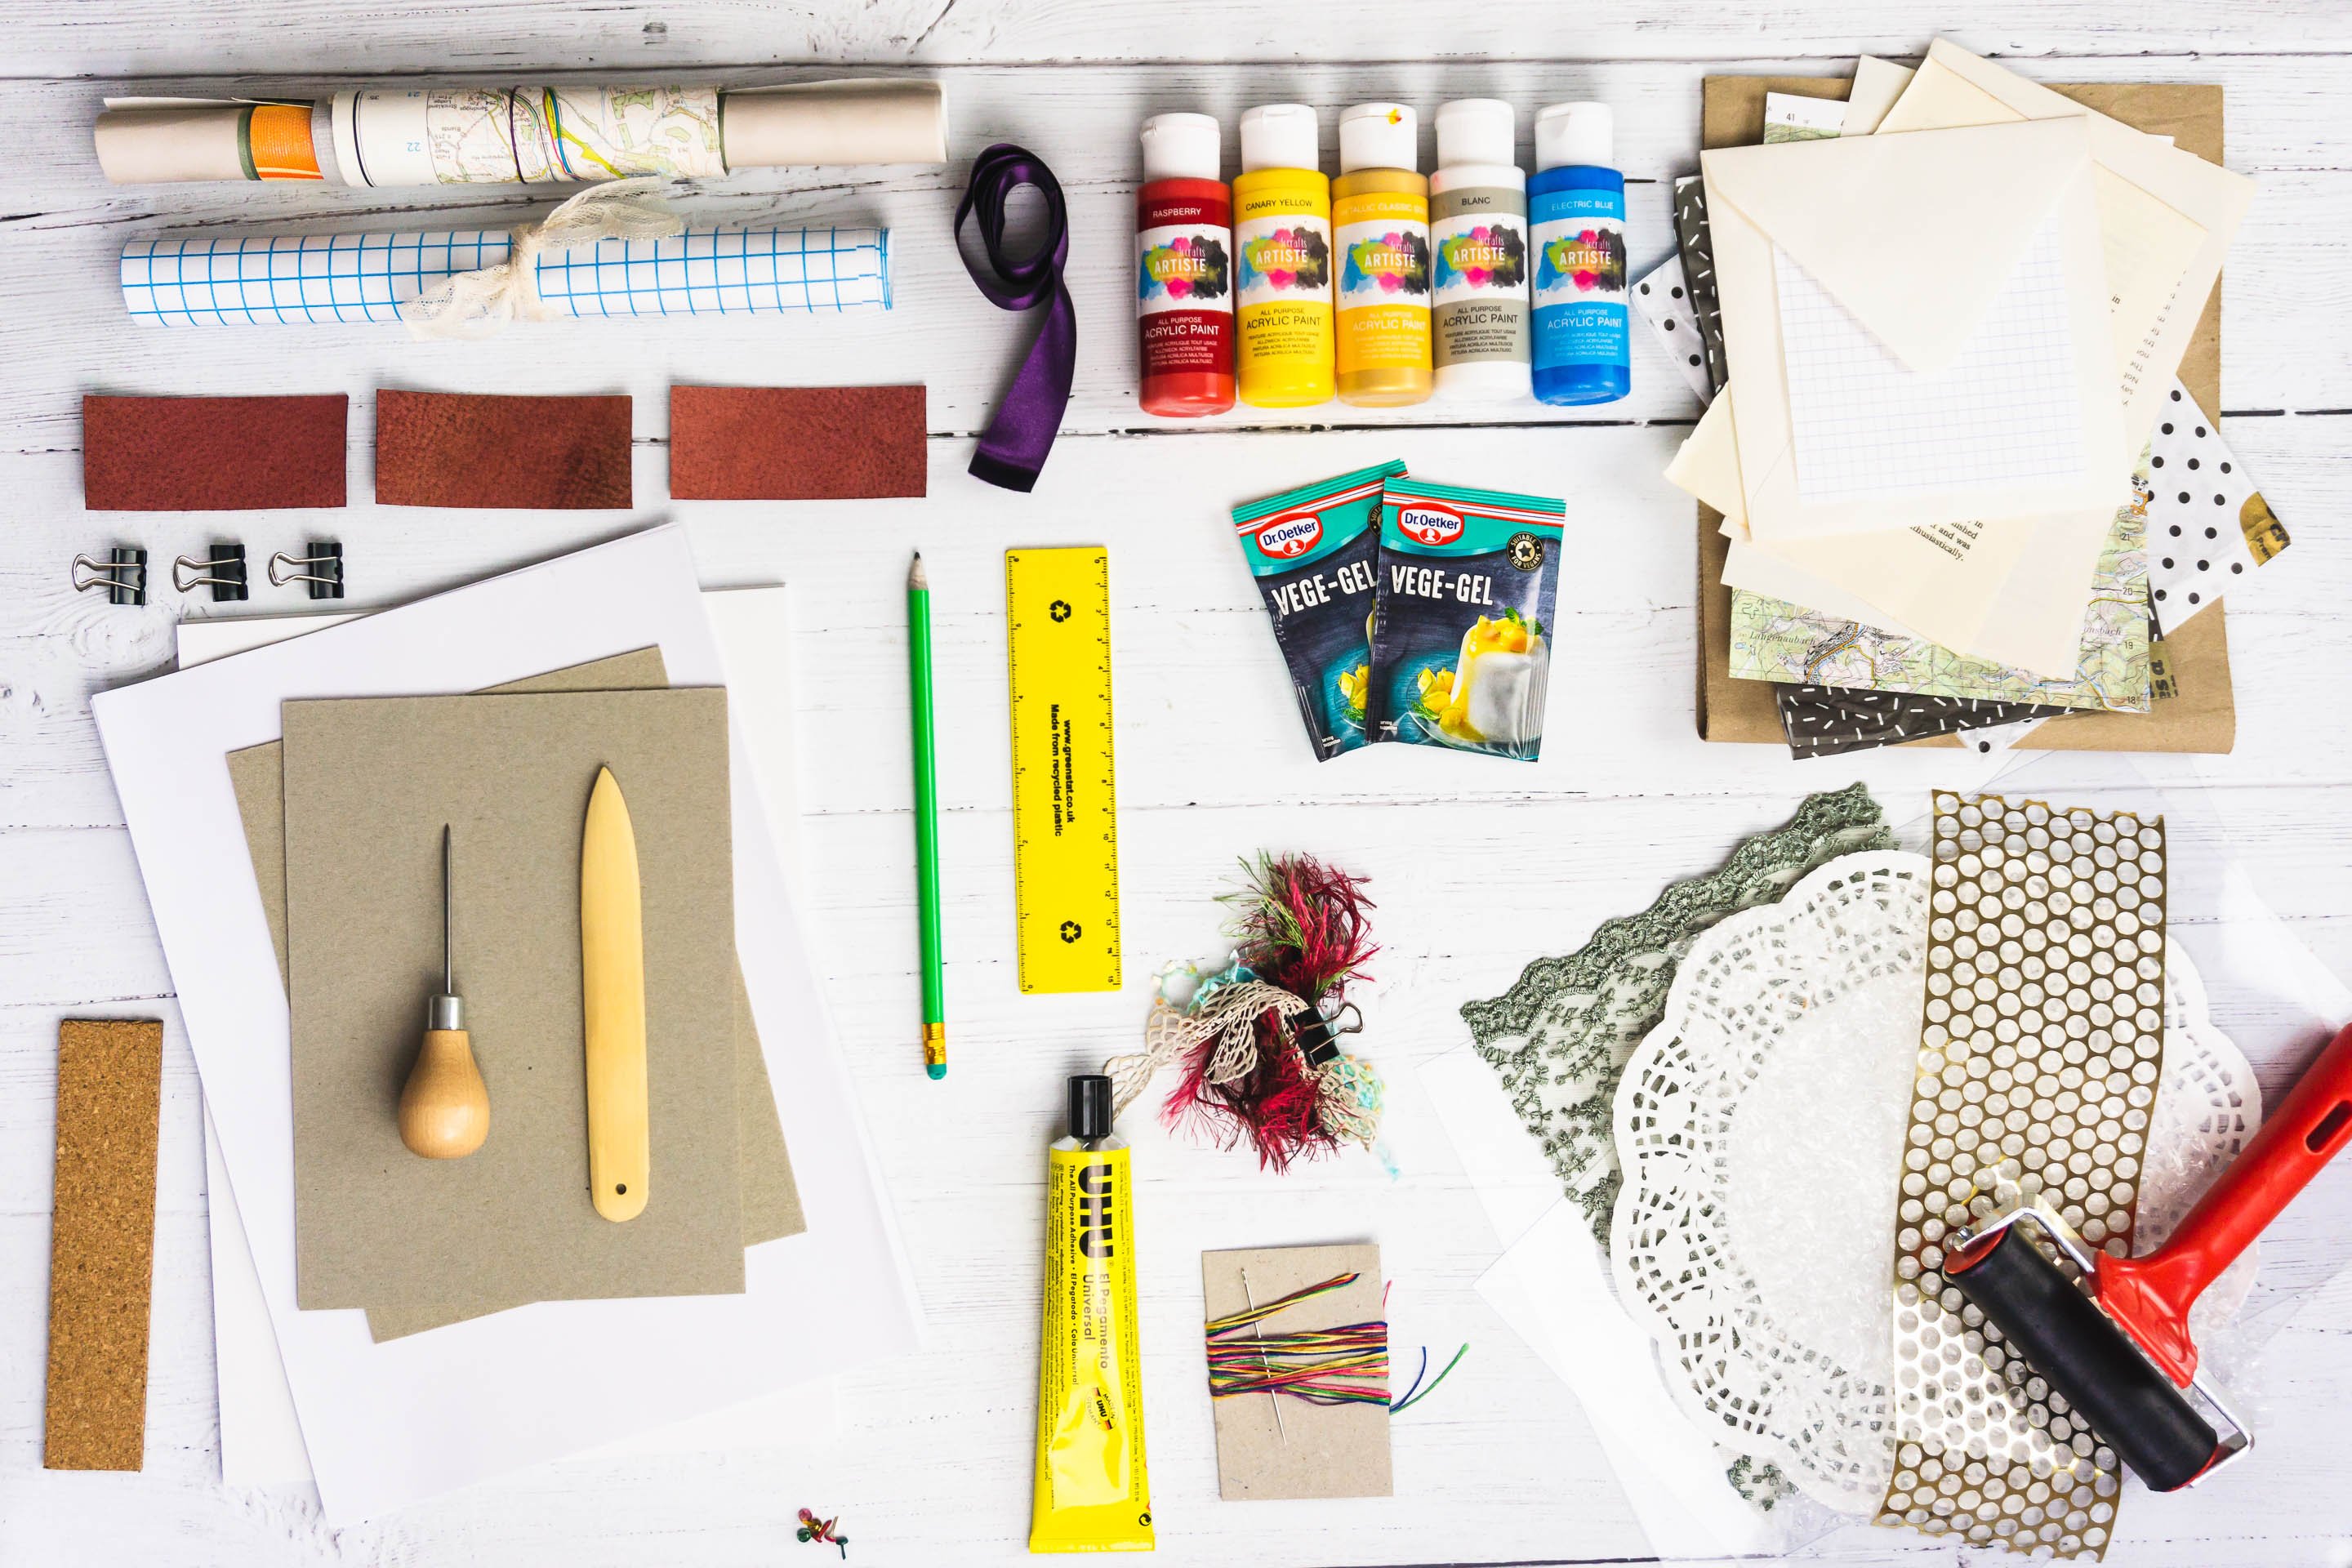 Online bookbinding and printing course with kit